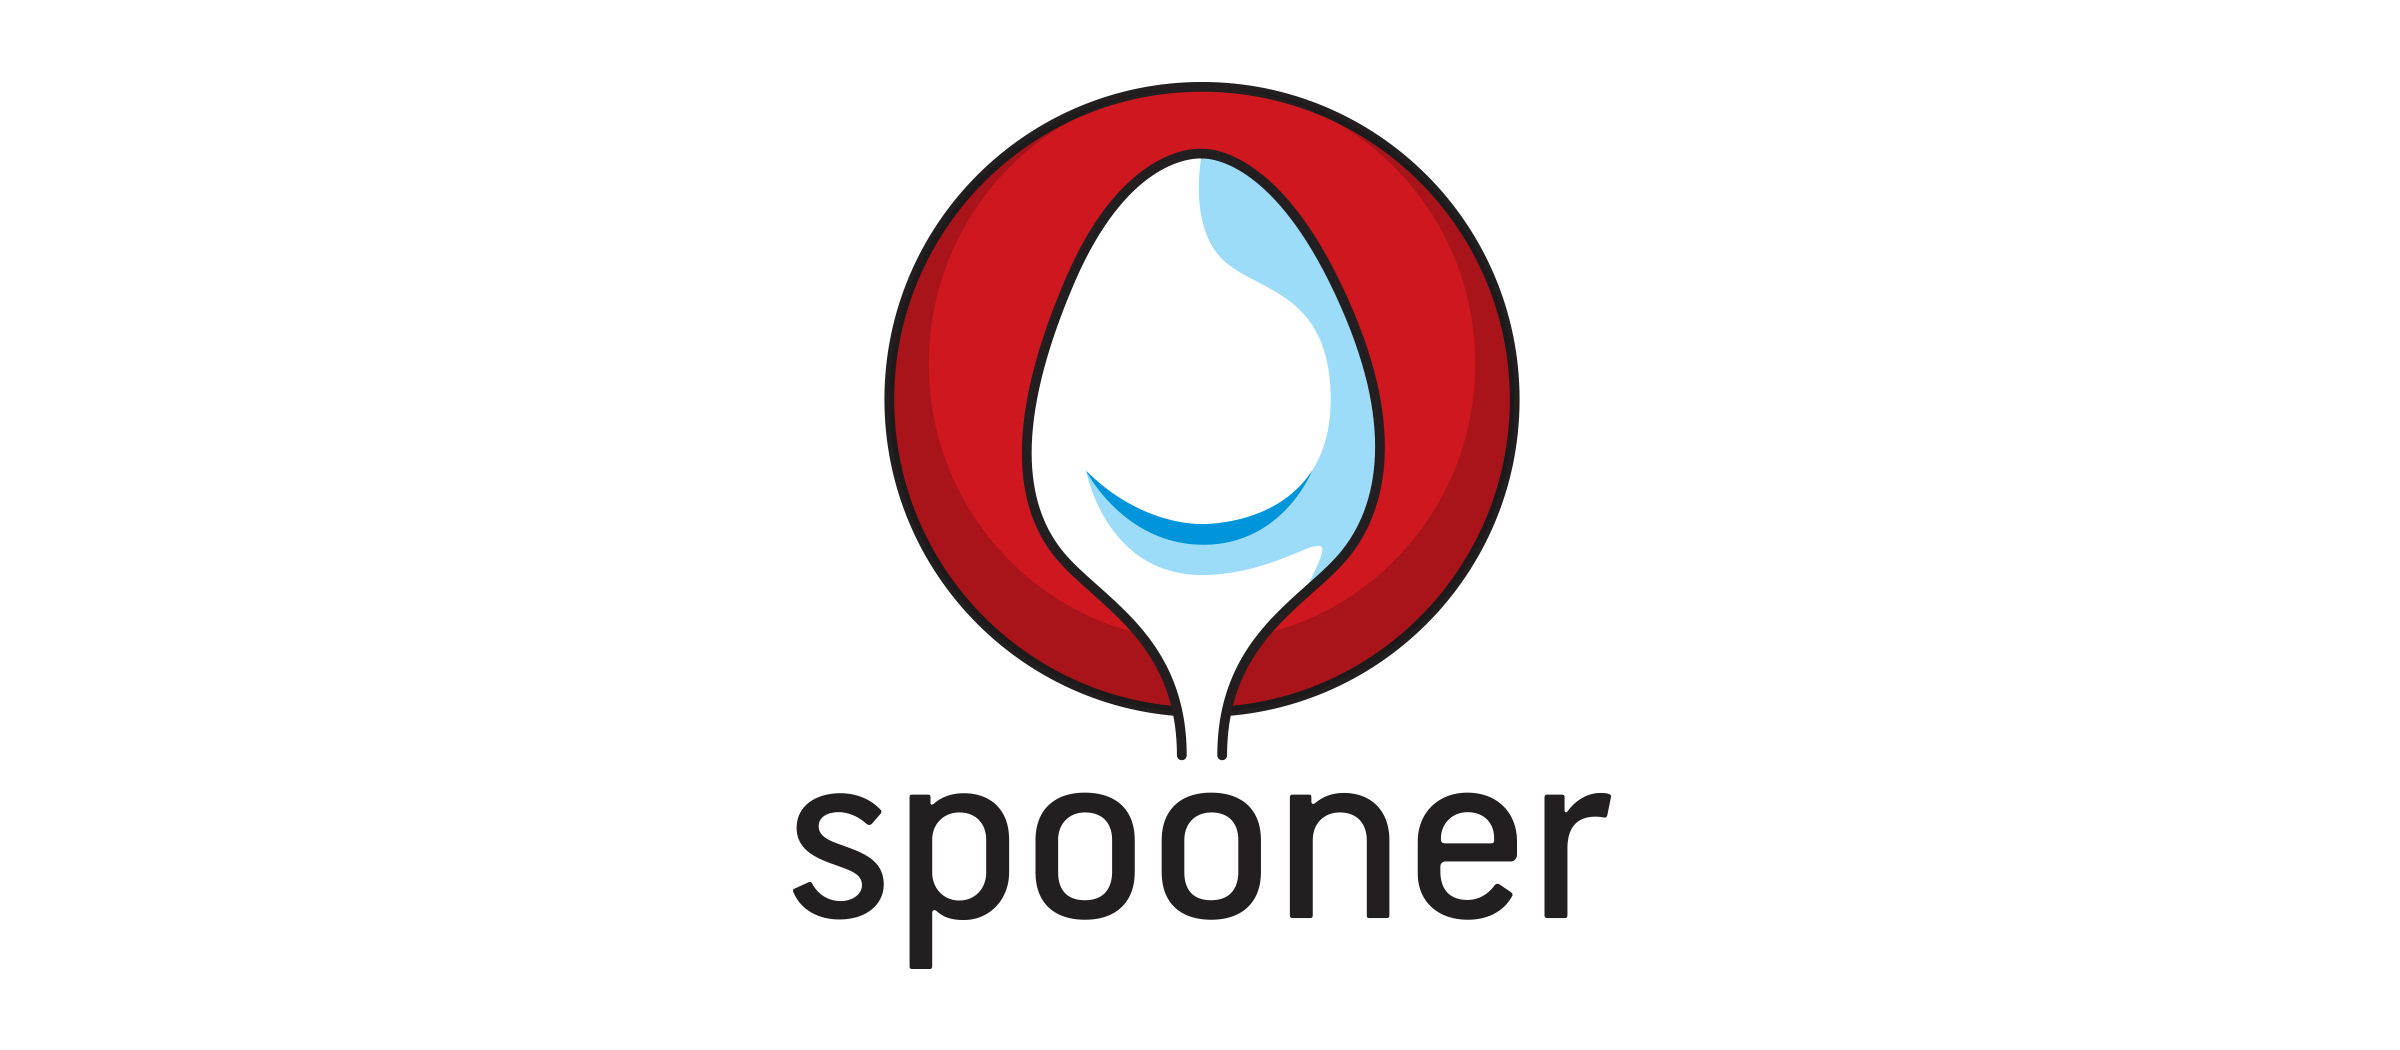 The Spooner also gives you a place for your used spoons!